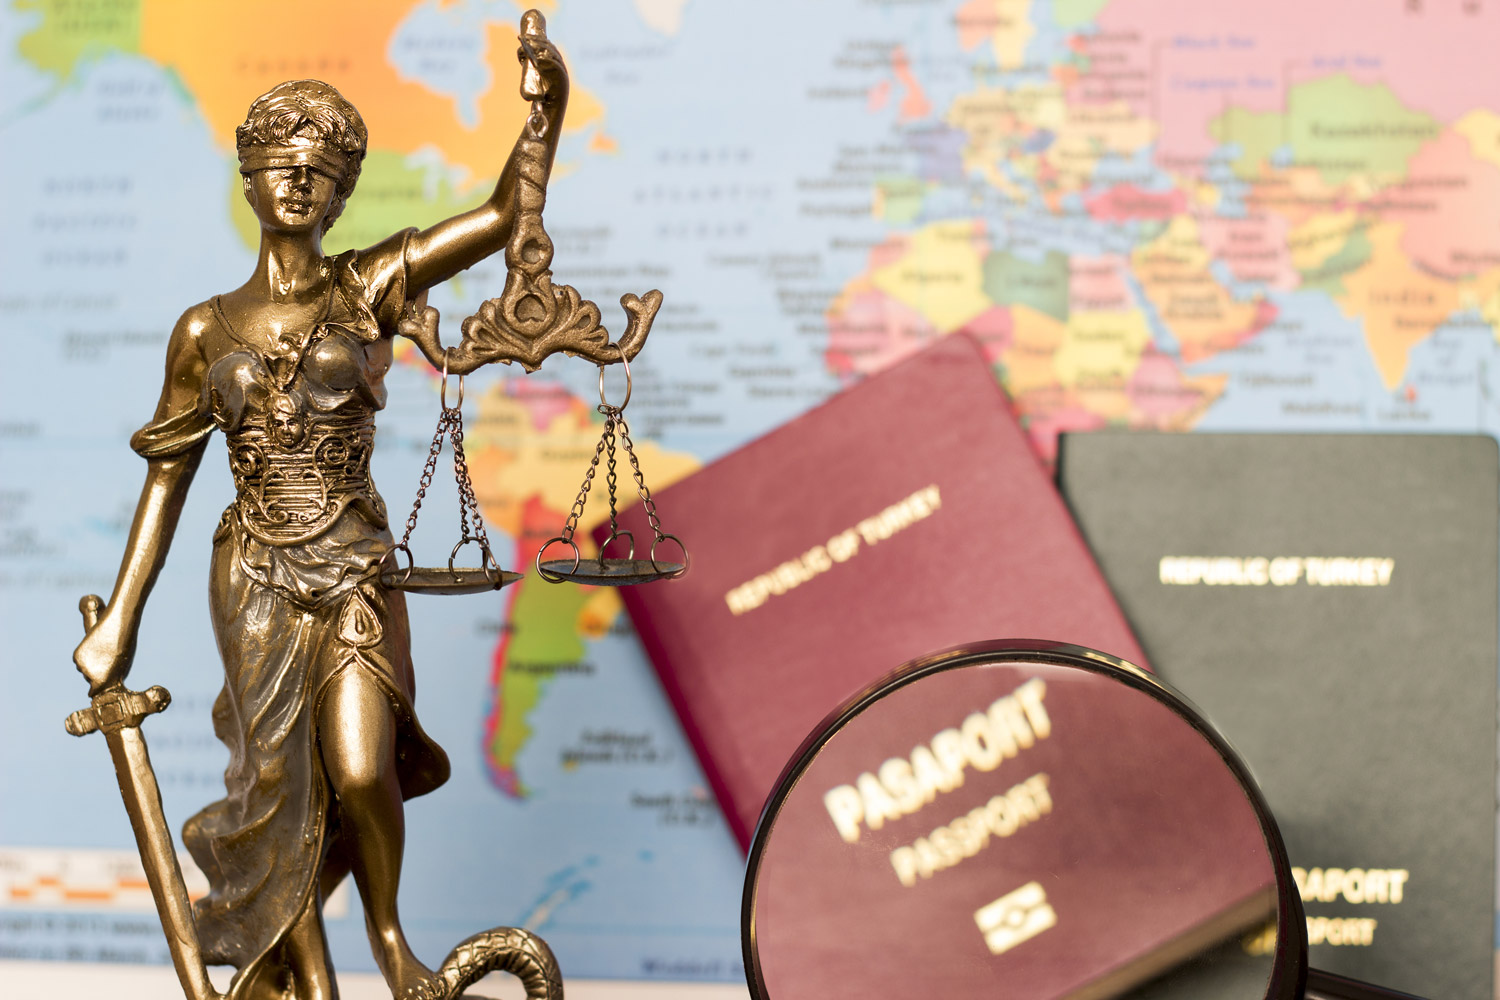 Recognition and Enforcement of Foreign Court Decisions